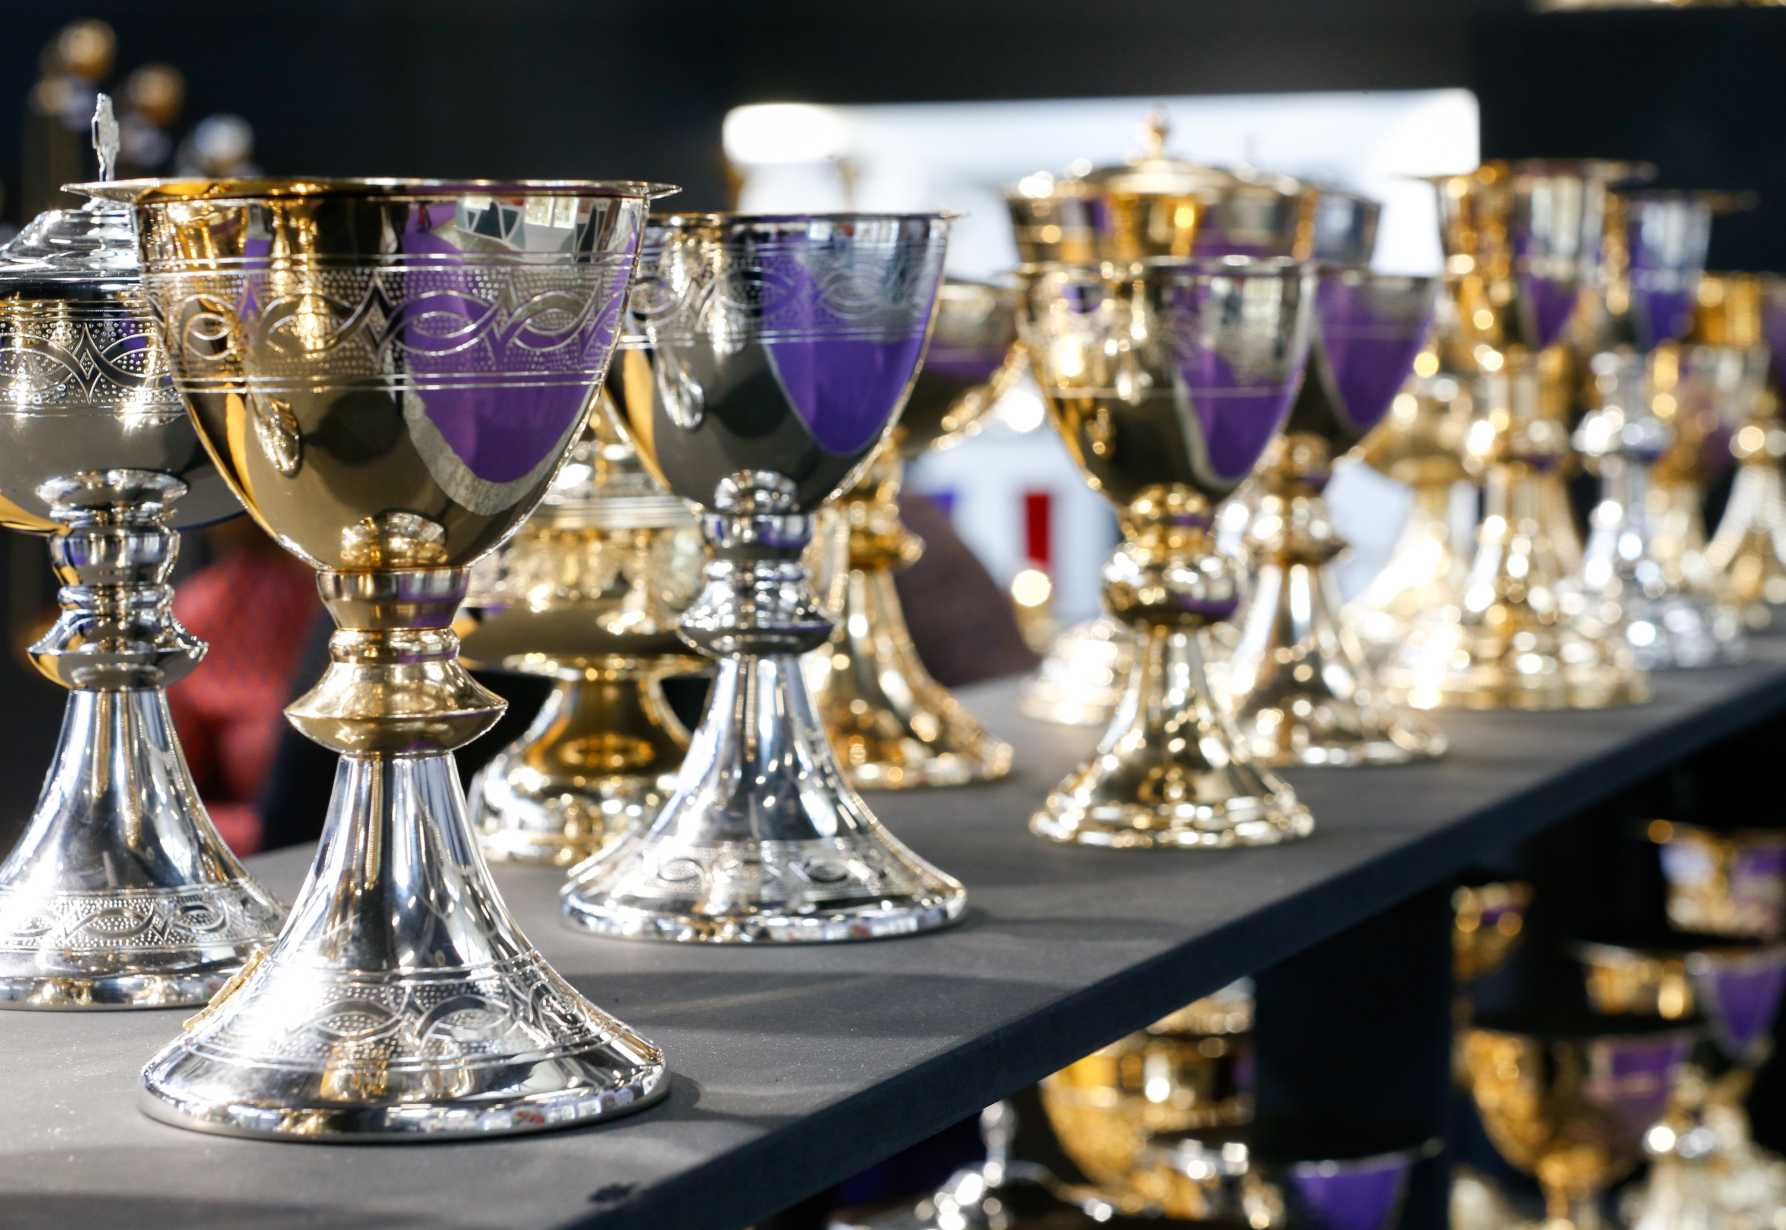 Chalices and chasubles: Fair displays industries revolving around religion